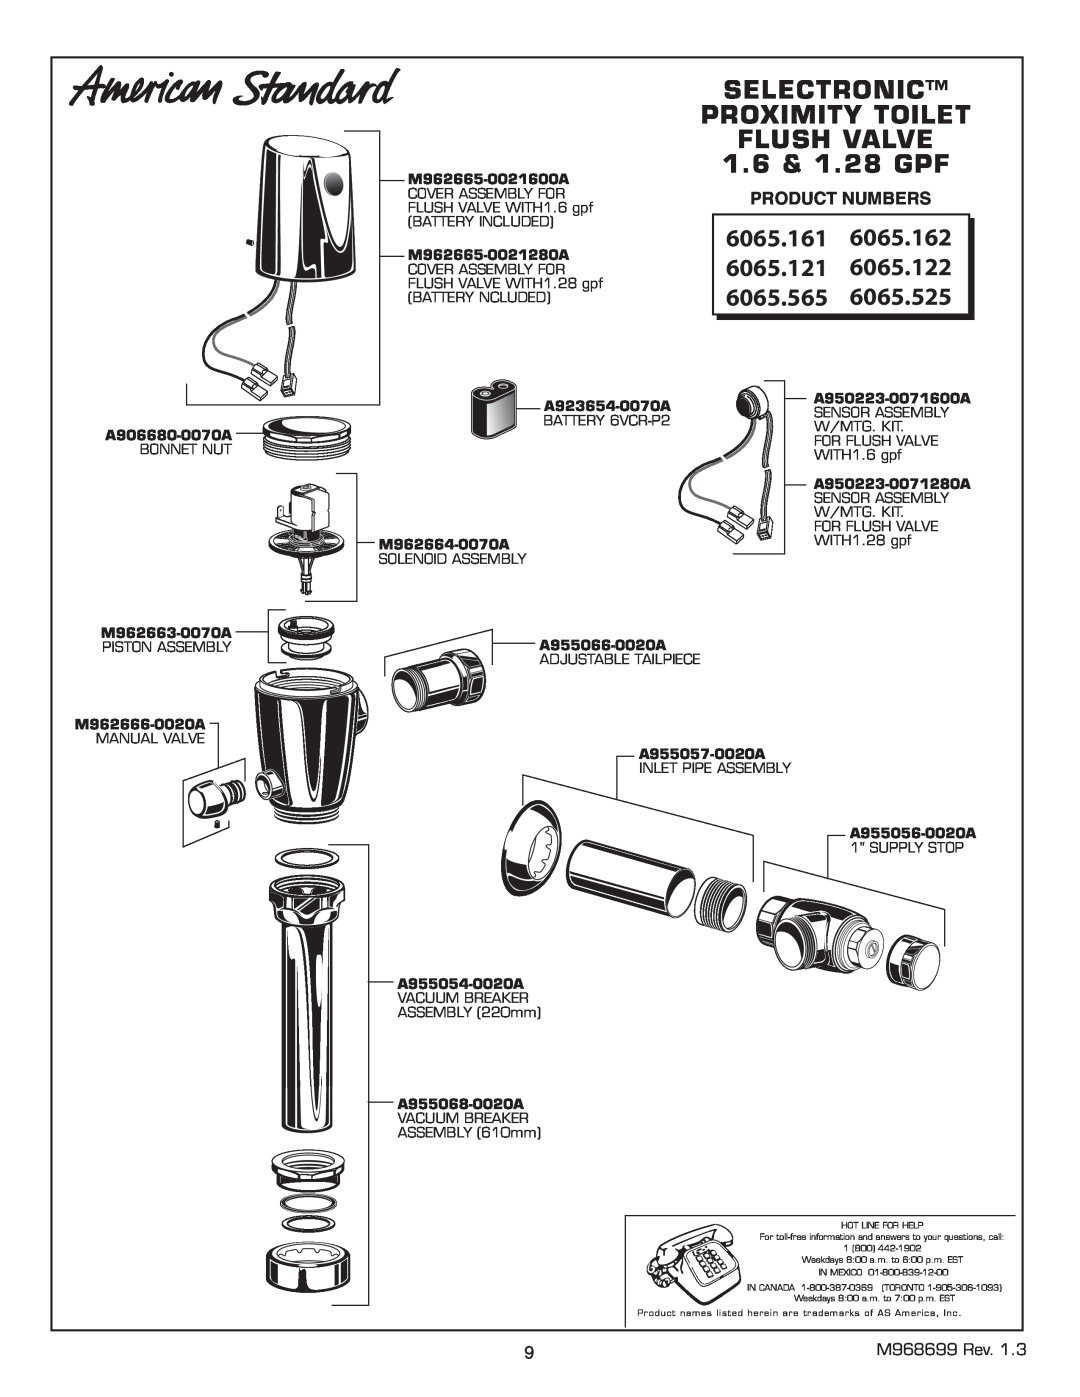 American Standard 6065.122, 065.525 Selectronic Proximity Toilet Flush Valve, 1.6 & 1.28 GPF, 6065.161, Product Numbers 